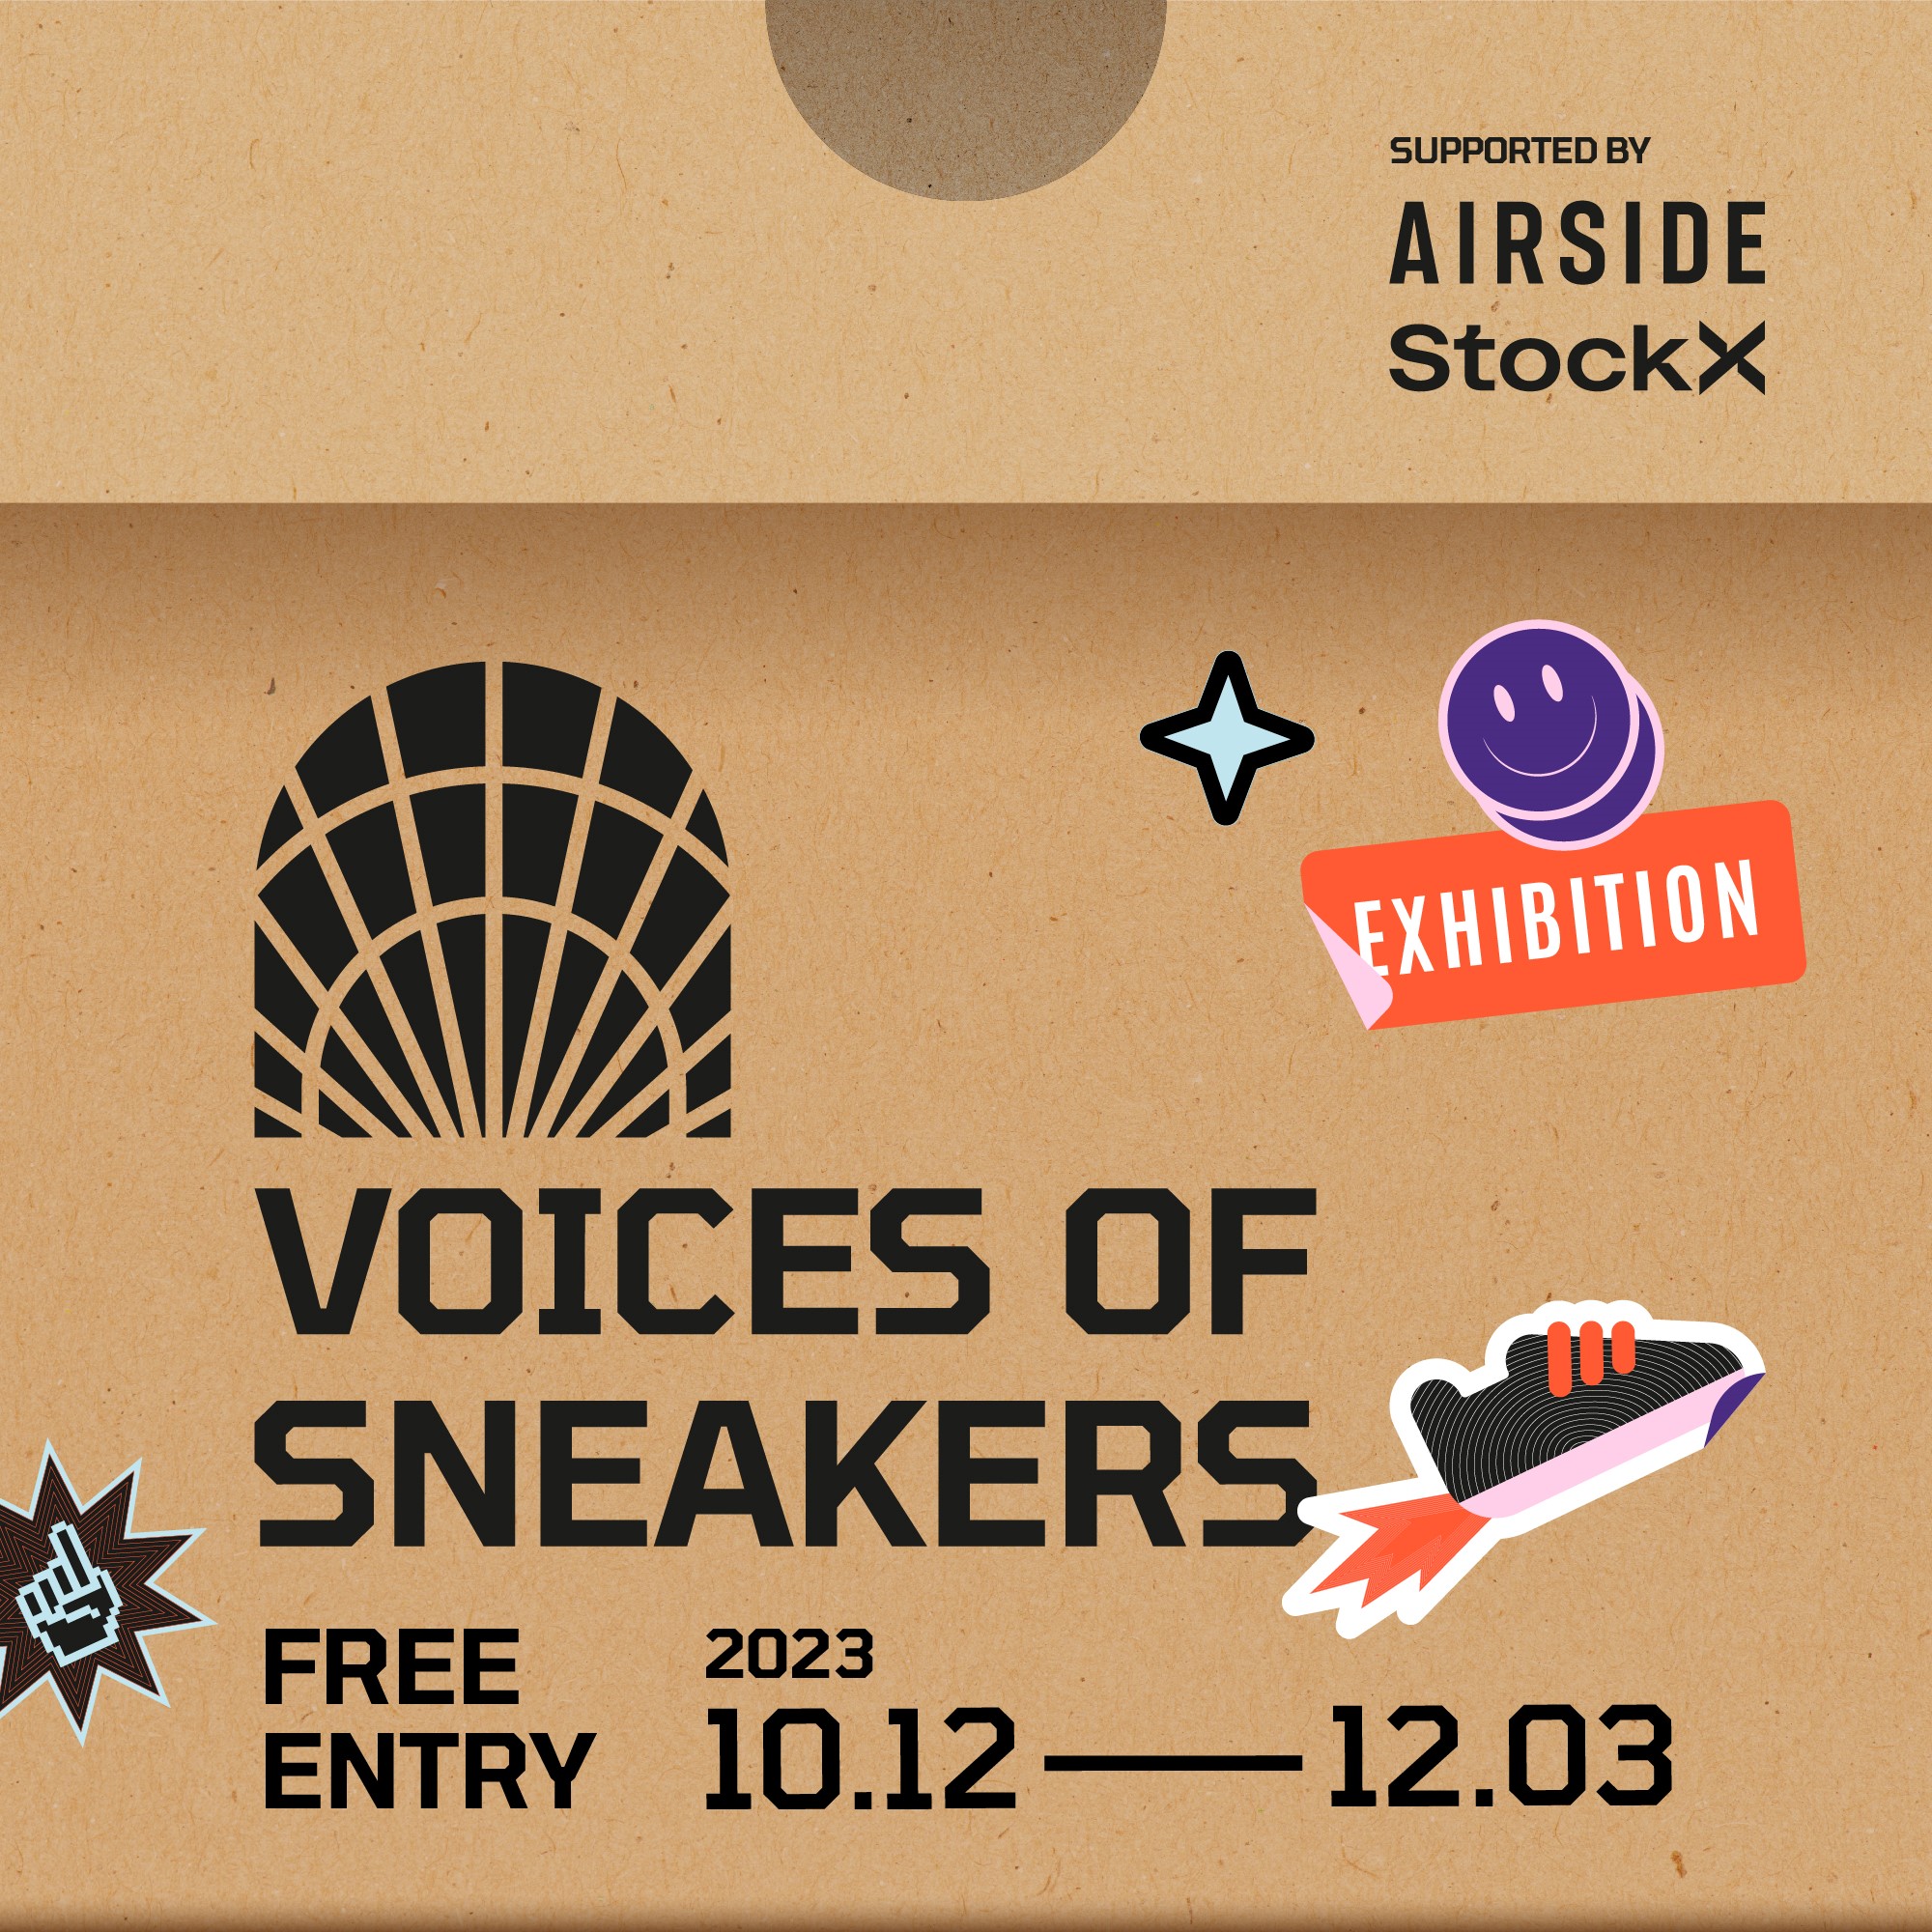 “VOICES OF SNEAKERS” Exhibition